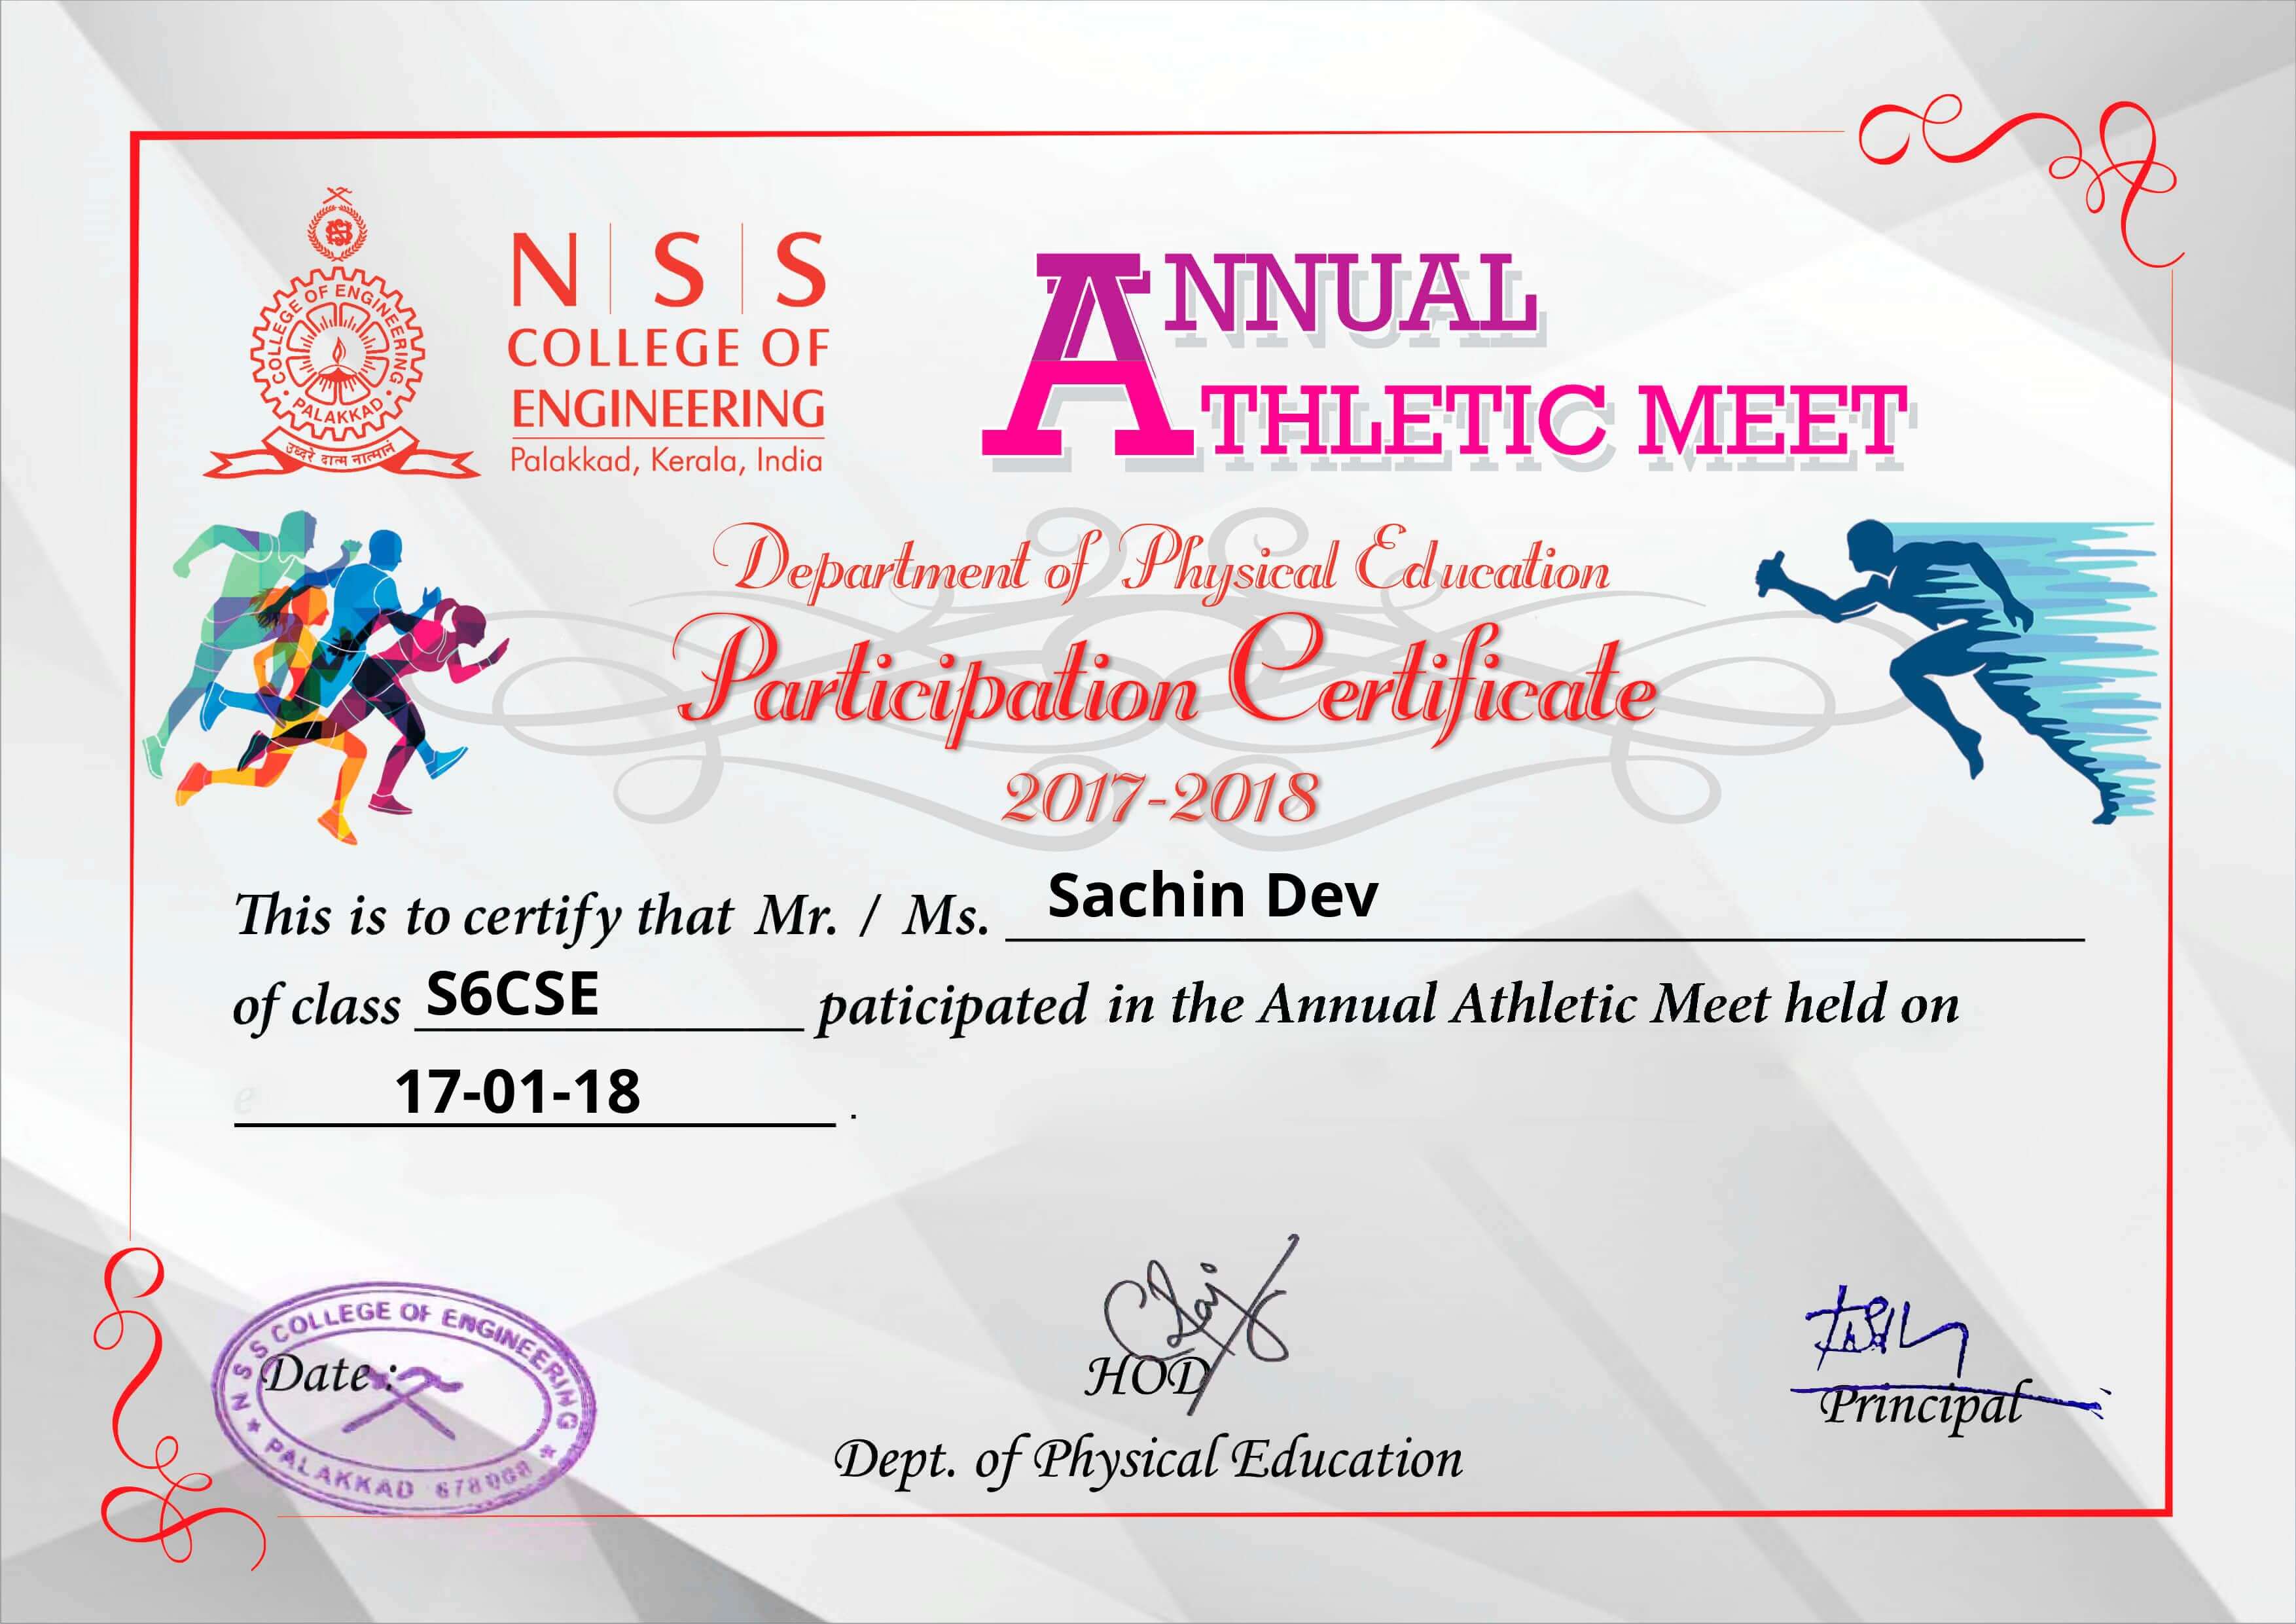 NSS Annual Athletic Meet Certificate Certificate Issuer The